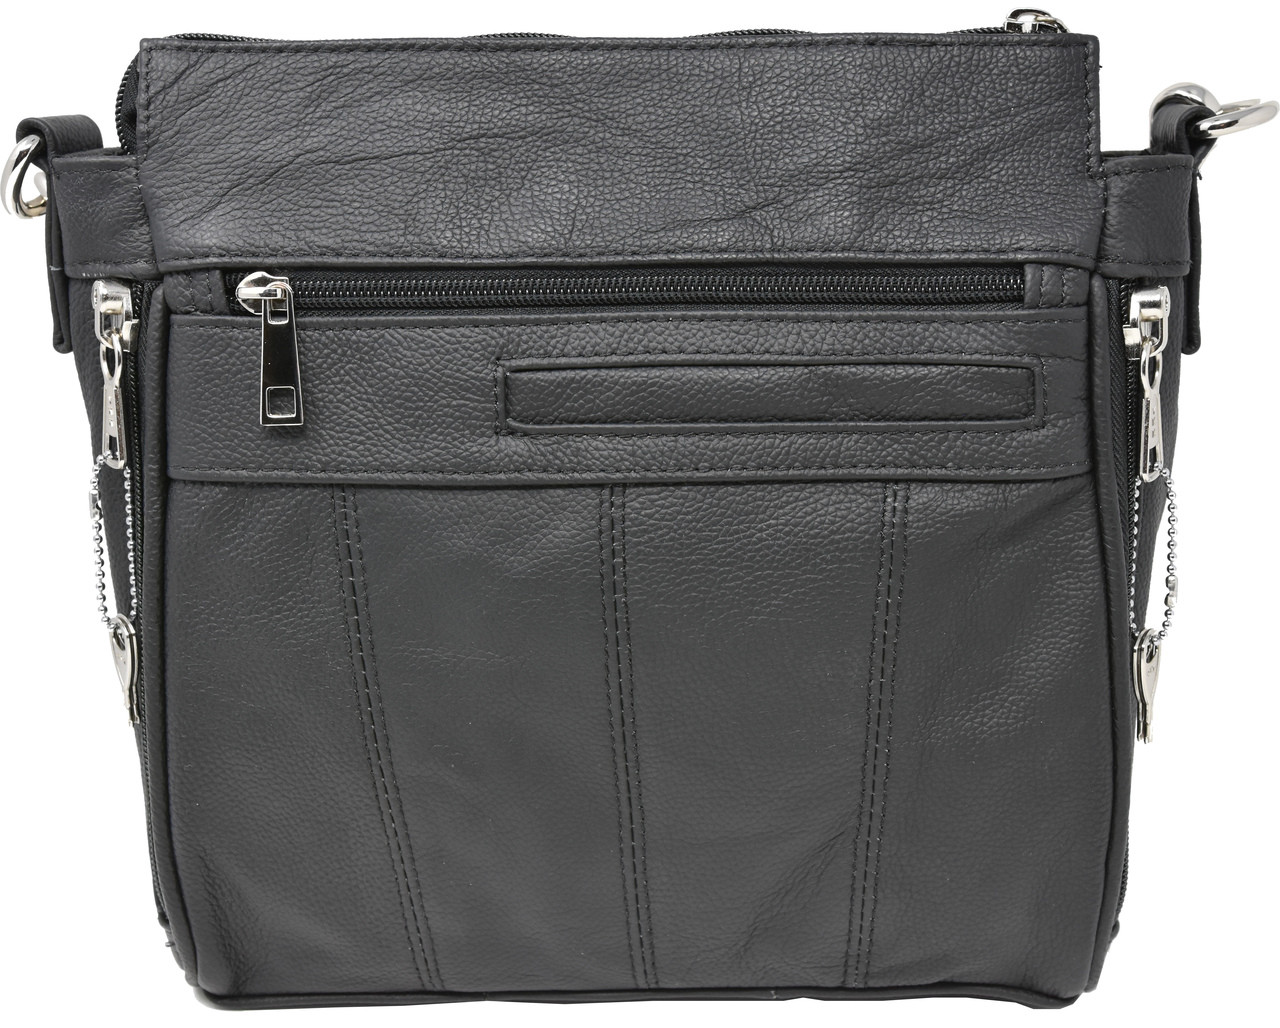 Black Crossbody or Shoulder Carry Leather Locking Concealment Purse  - CCW Concealed Carry Gun Bag